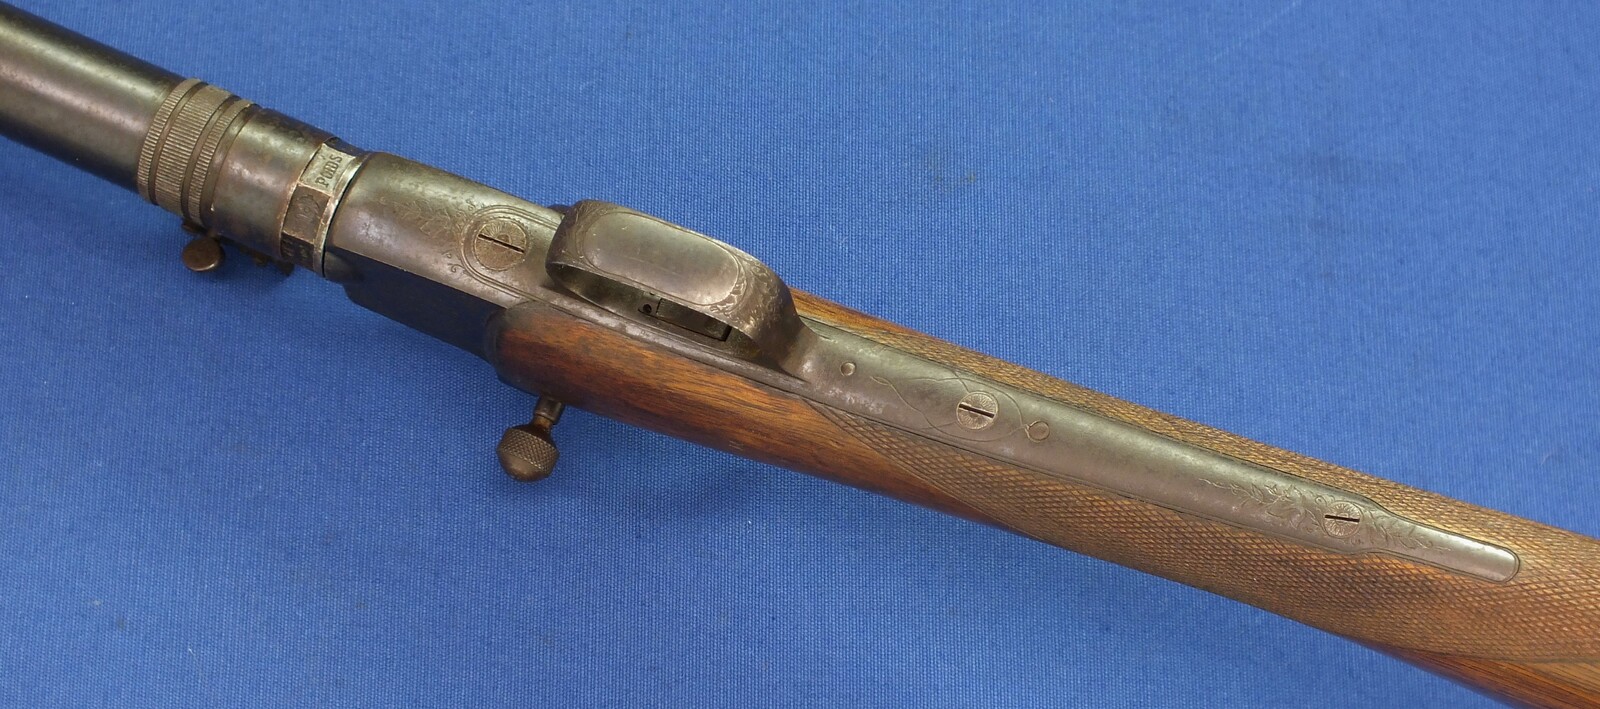 A rare antique French circa 1880 Giffard Carbonic Acid Gas/CO2 Air Rifle. Caliber 8mm rifled. Length 106cm. In very good condition. Price 1.650 euro.